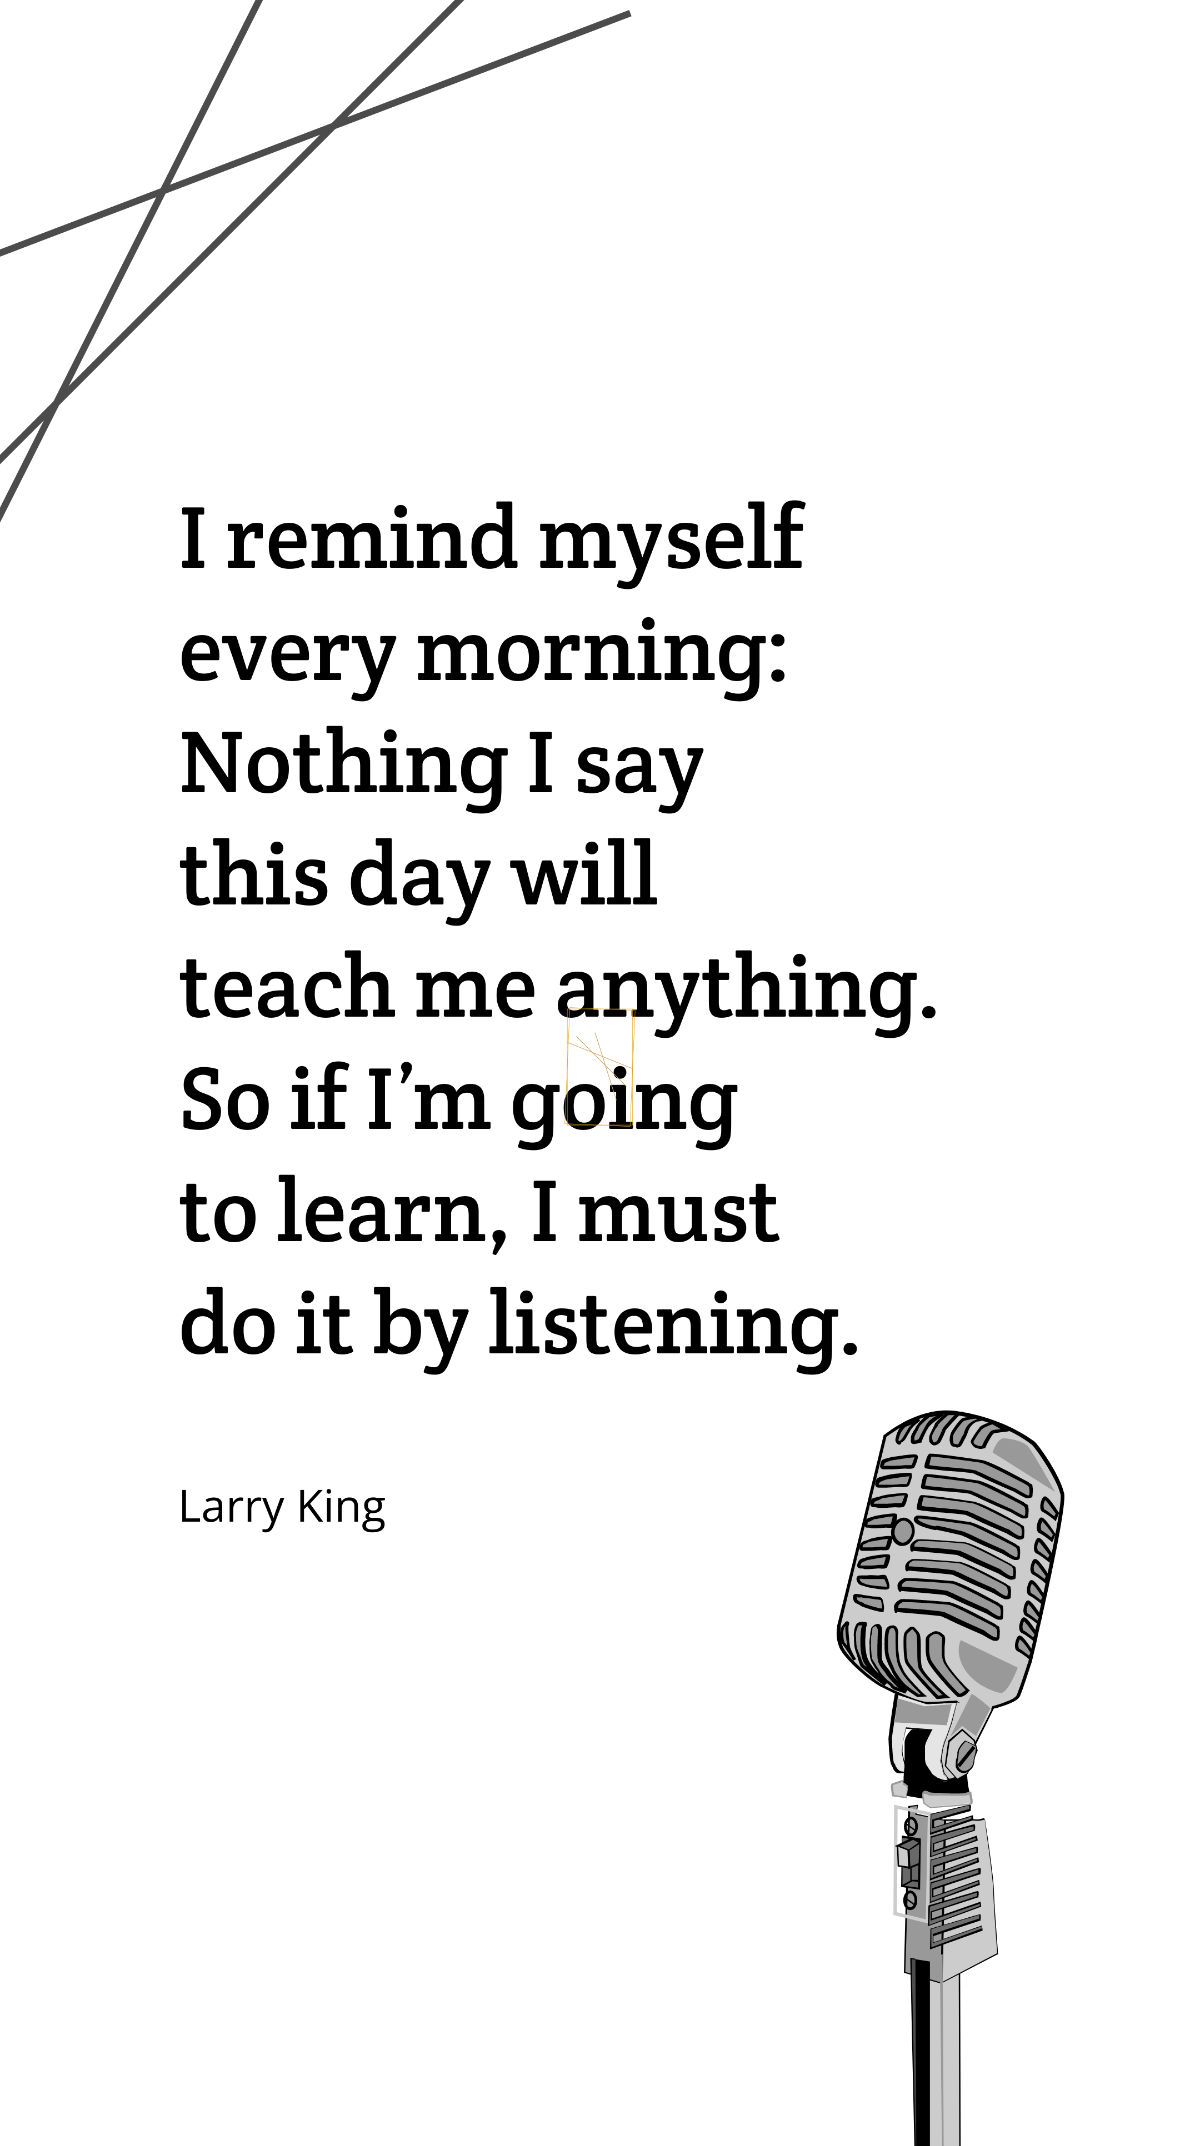 Larry King - I remind myself every morning: Nothing I say this day will teach me anything. So if I’m going to learn, I must do it by listening. Template